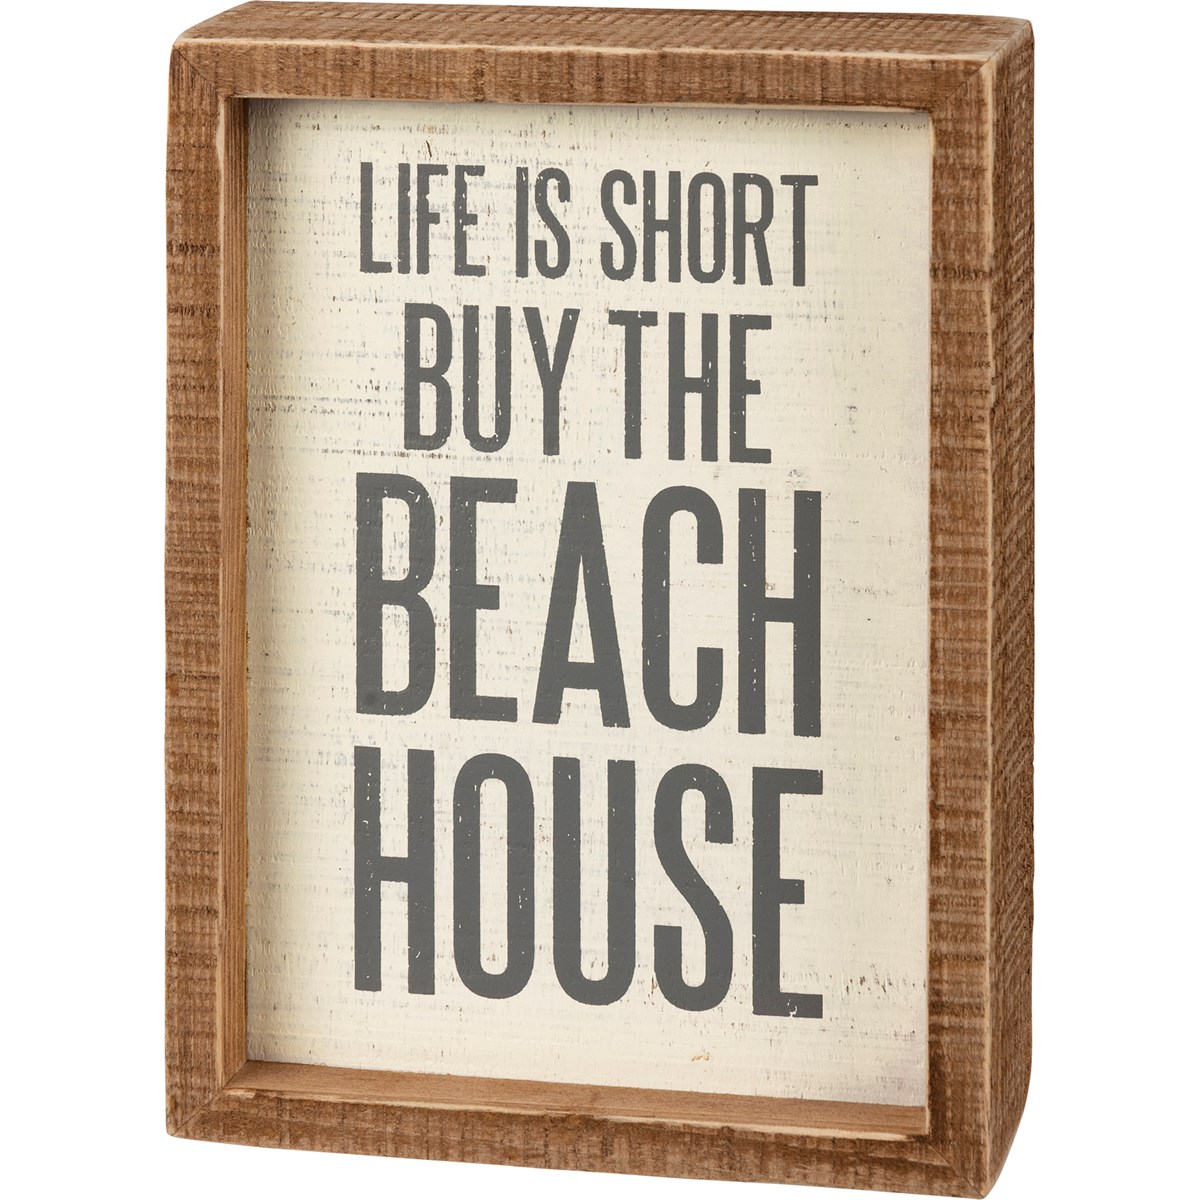 Life Is Short Buy The Beach House Inset Box Sign - Wood